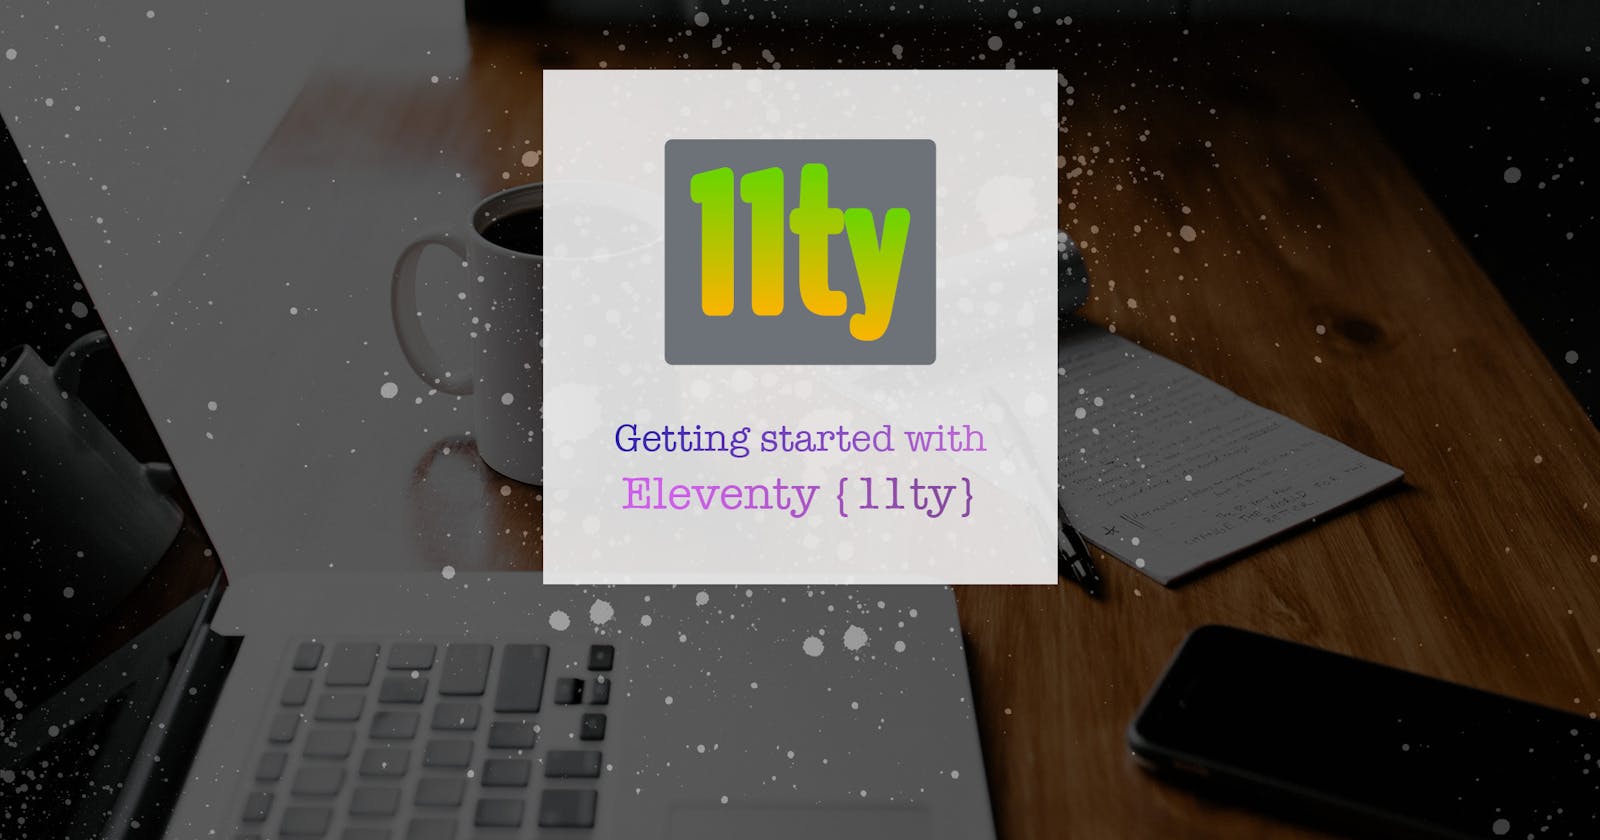 Getting started with Eleventy (11ty)